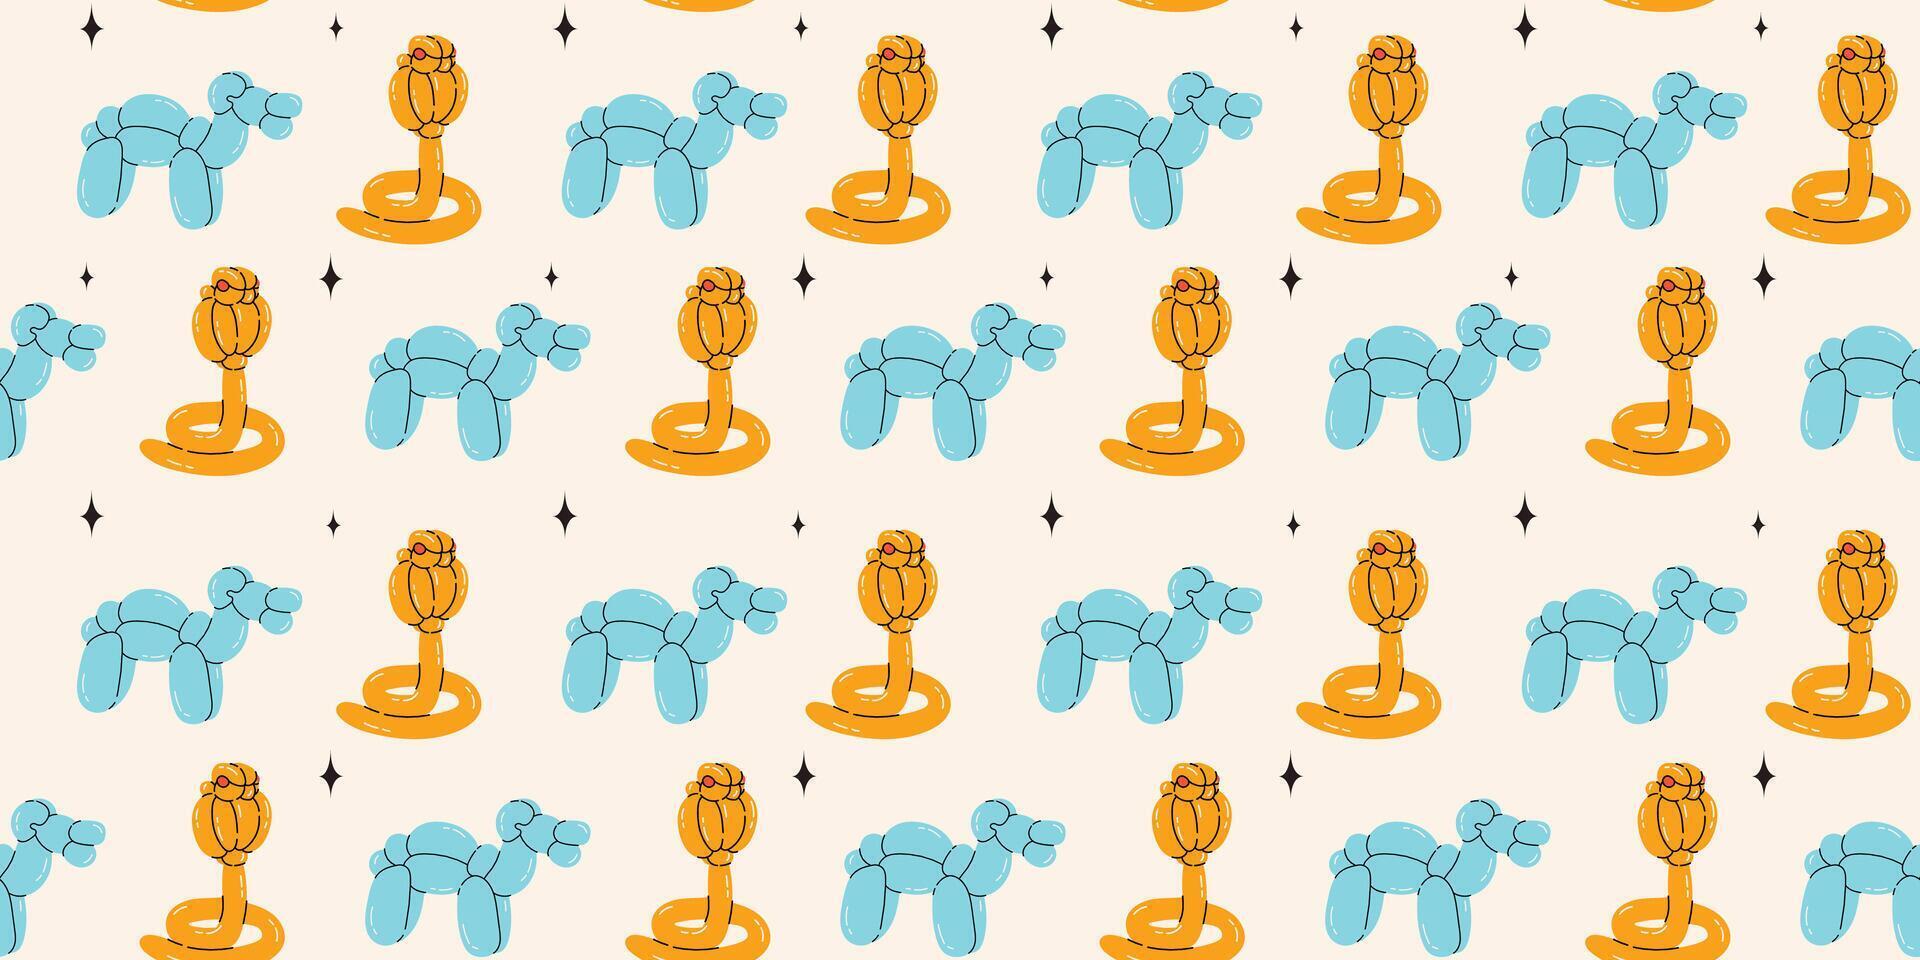 Seamless pattern with snake, camel balloons. Bright colorful repeating elements. Stock illustration. Vector seamless pattern of cute cartoon bubble animal in color.